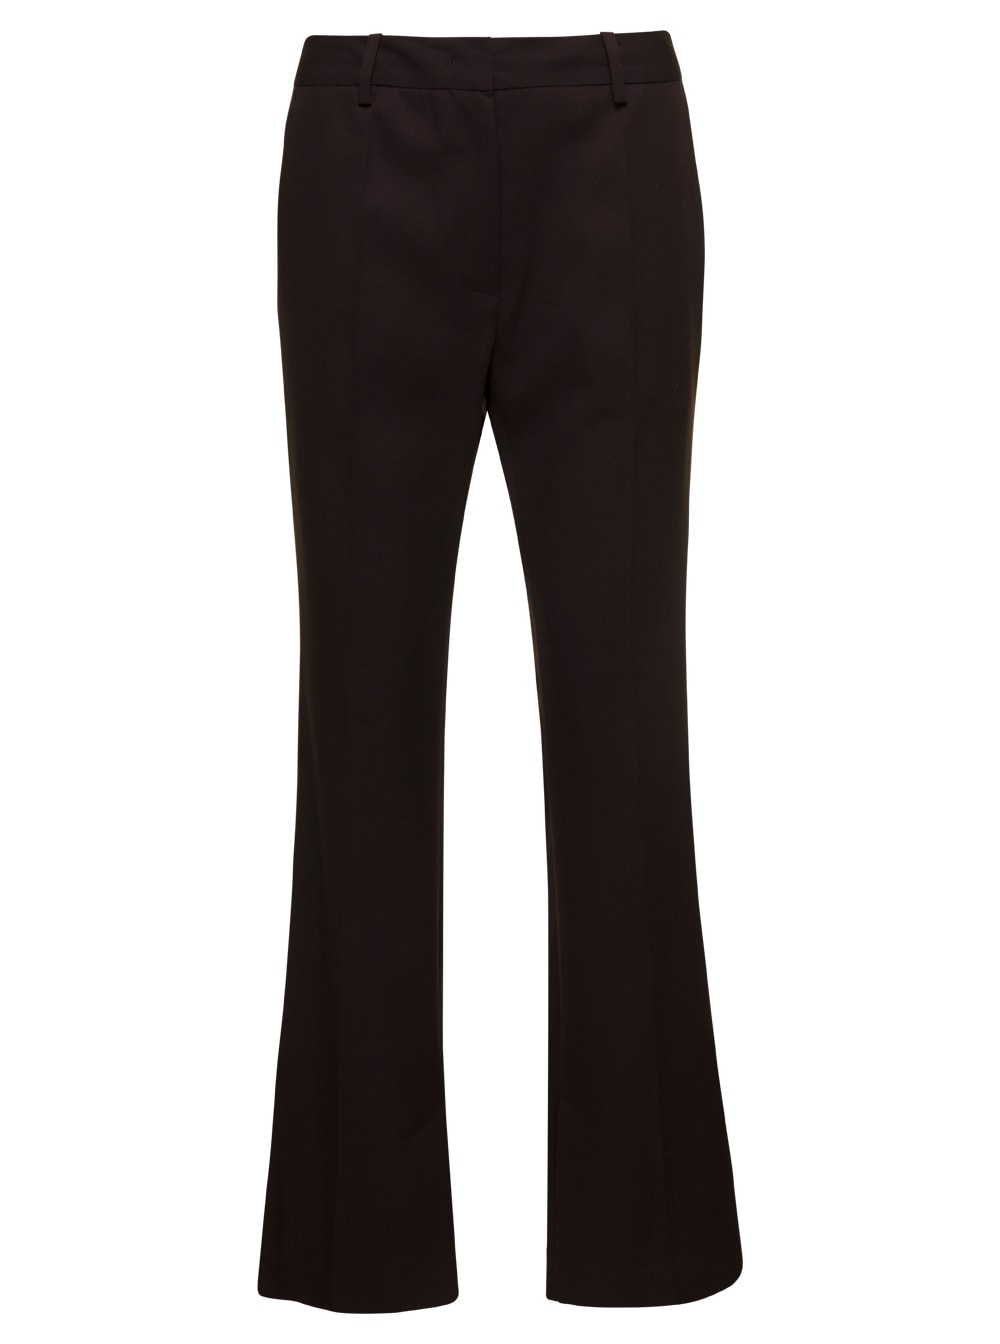 LOW CLASSIC FLARE PANTS